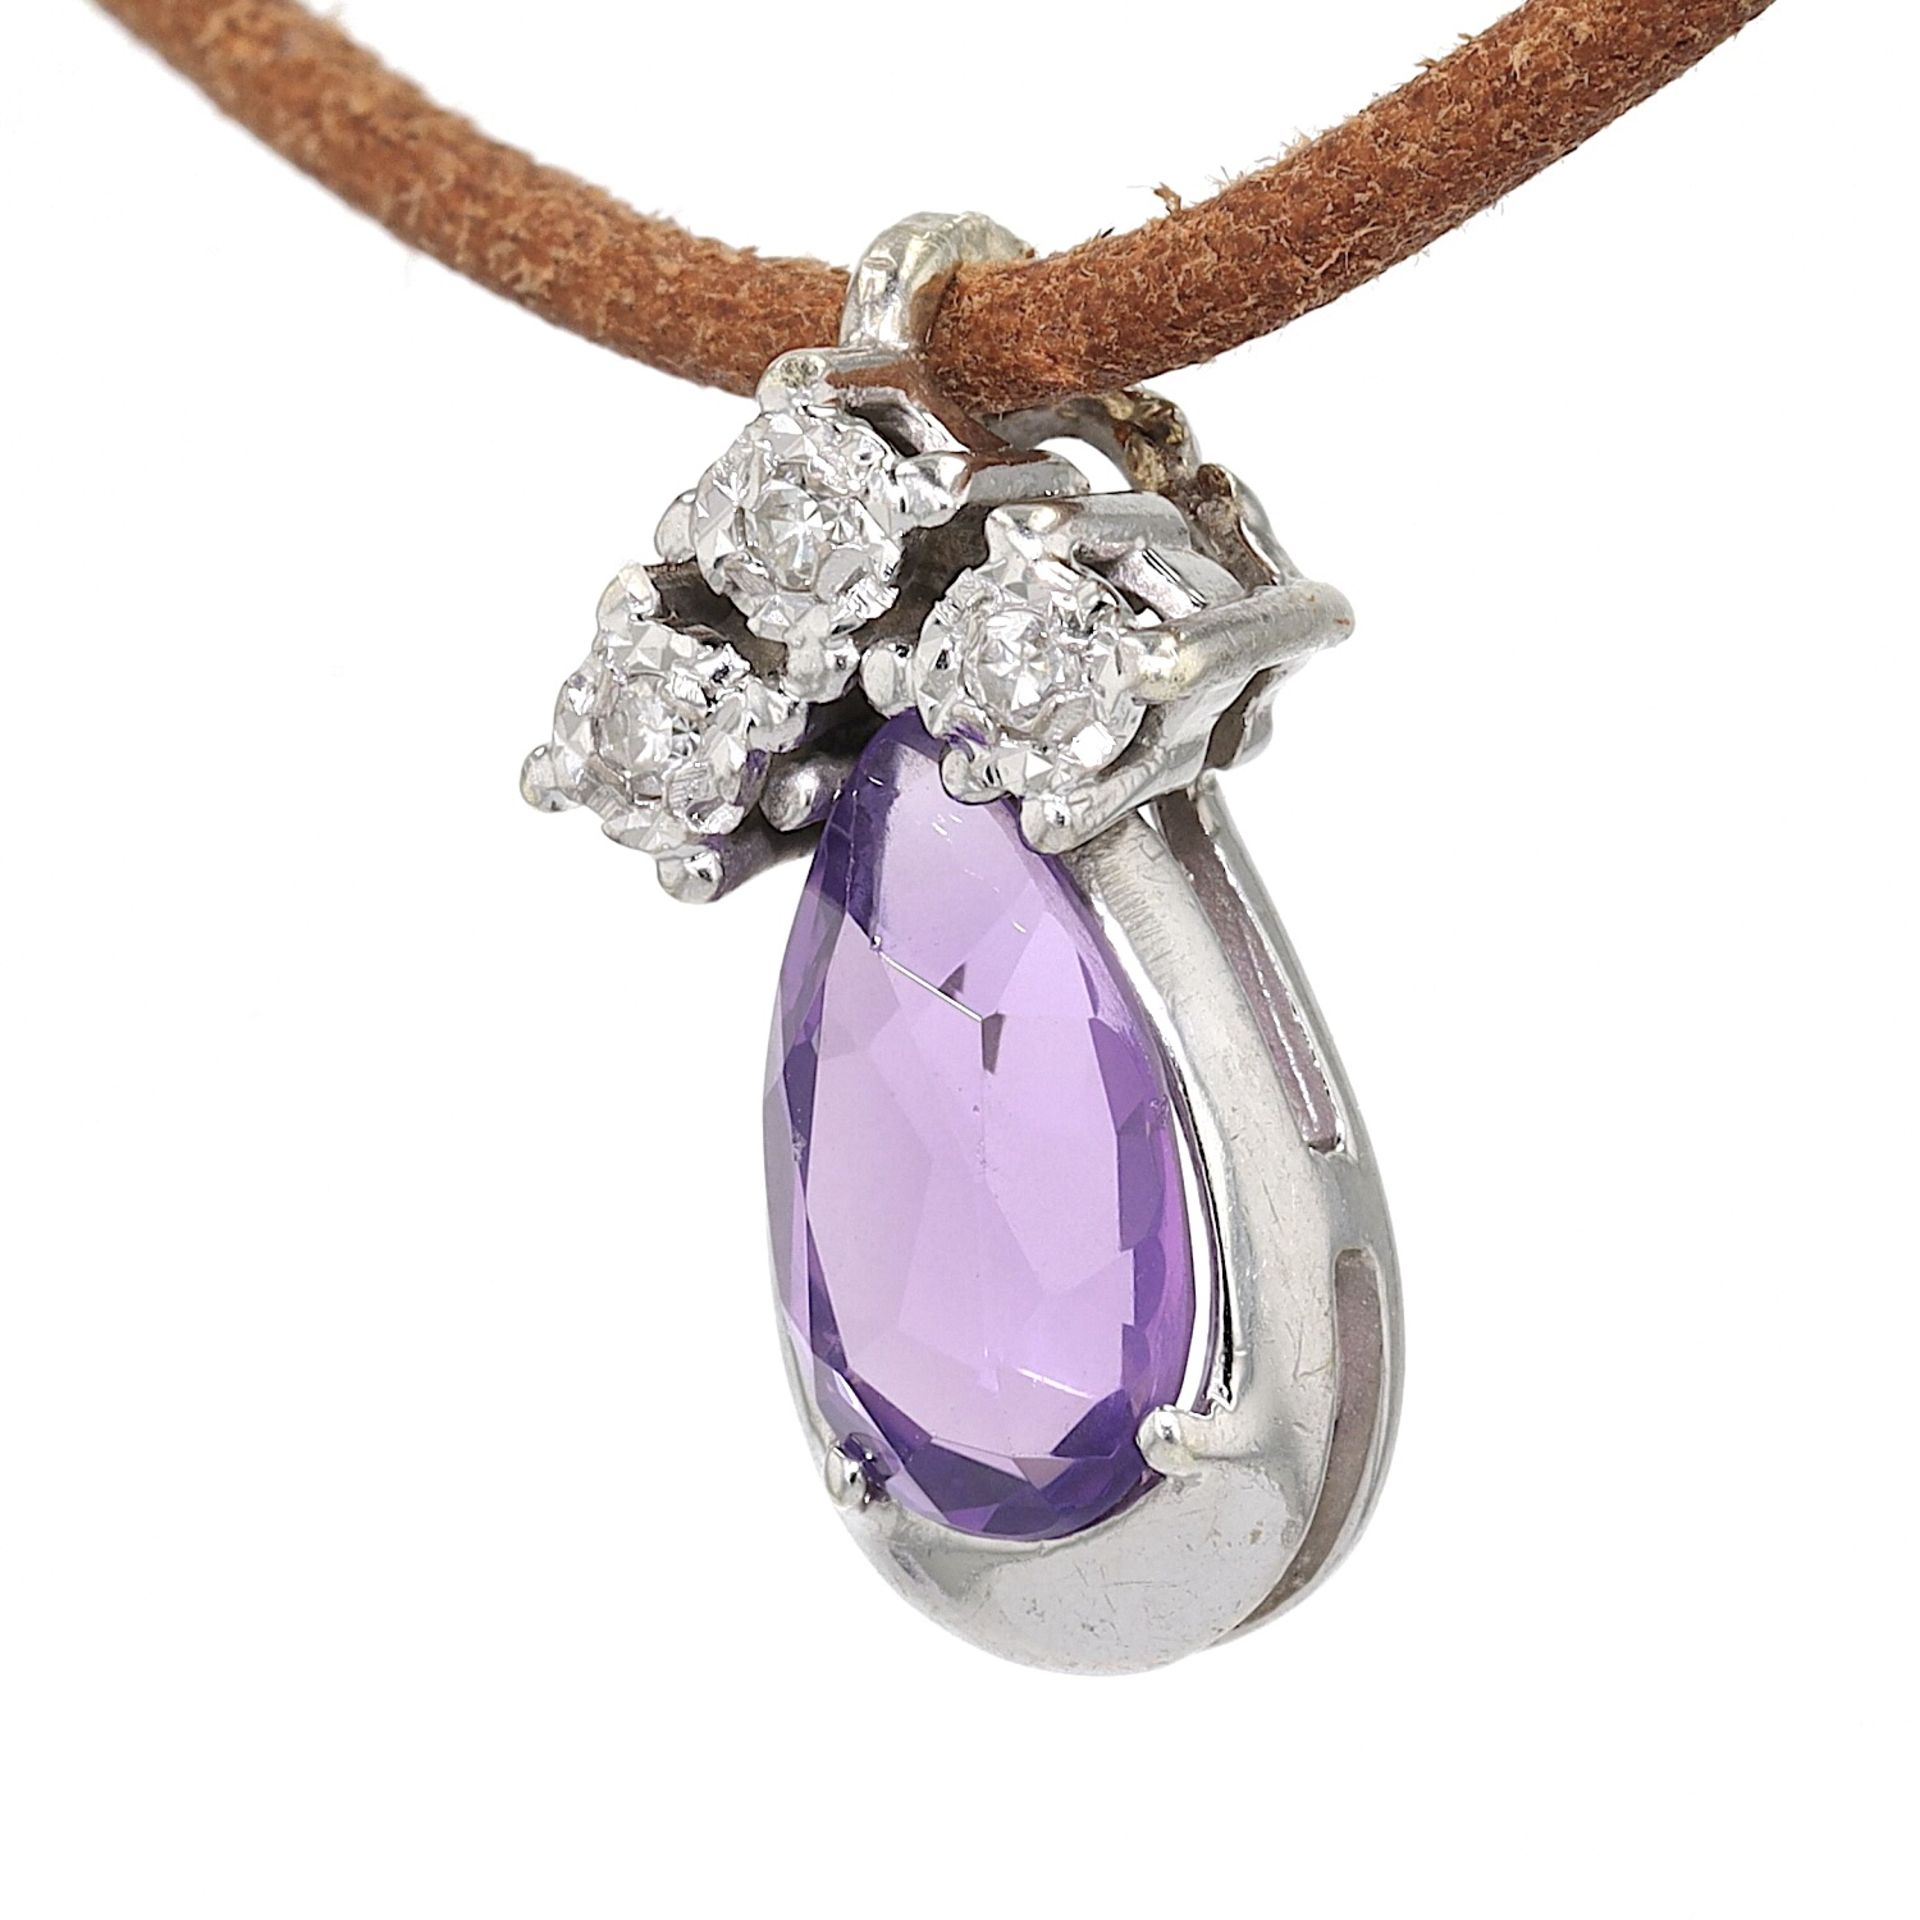 Pendant with amethyst and diamonds - Image 2 of 4